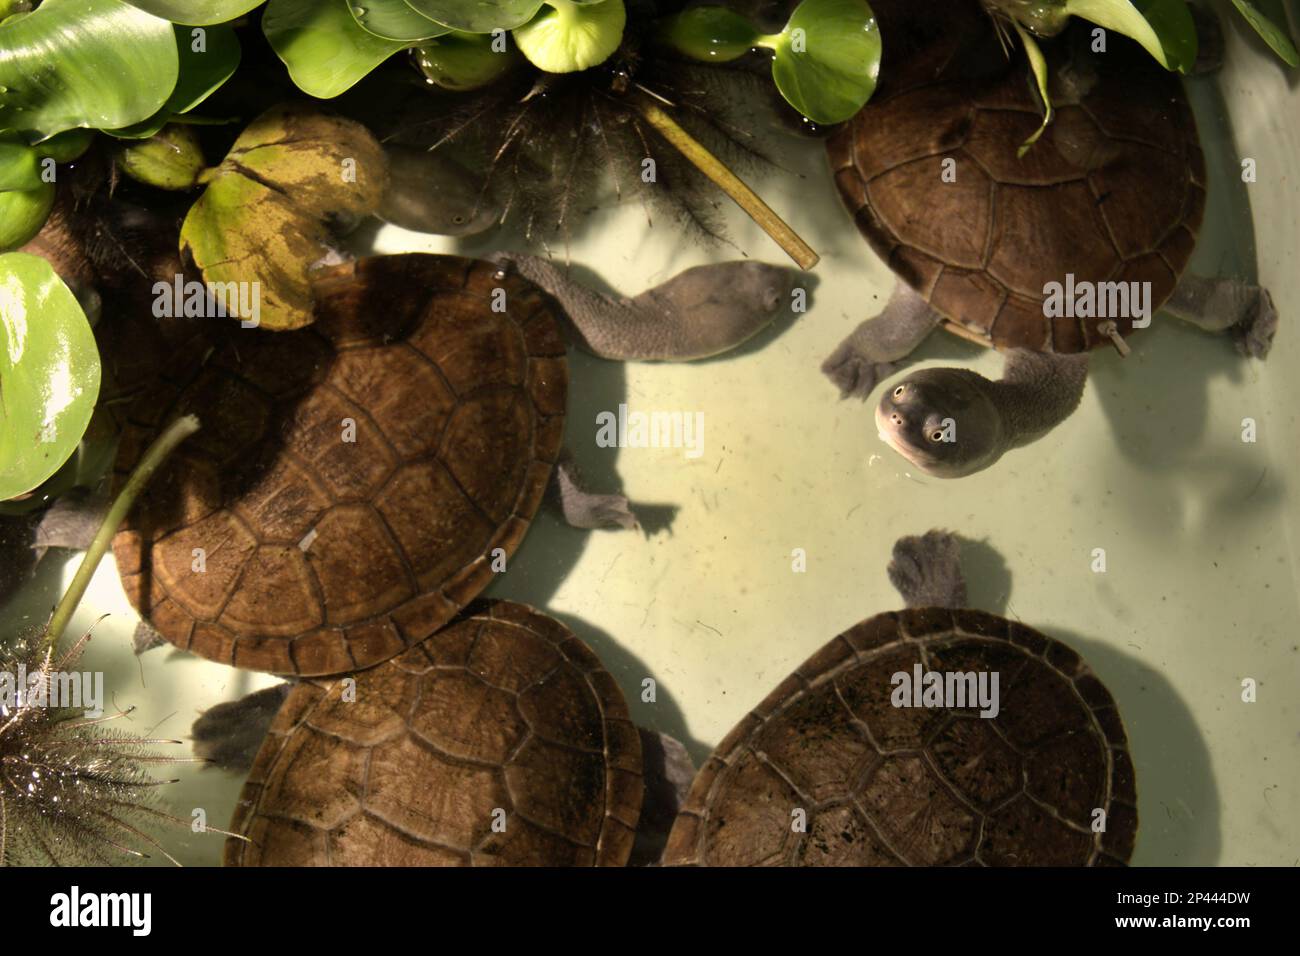 Rare and threatened species of freshwater turtle, the critically endangered Rote Island's endemic snake-necked turtles (Chelodina mccordi) at a licensed ex-situ wildlife breeding farm in Jakarta, Indonesia. Stock Photo